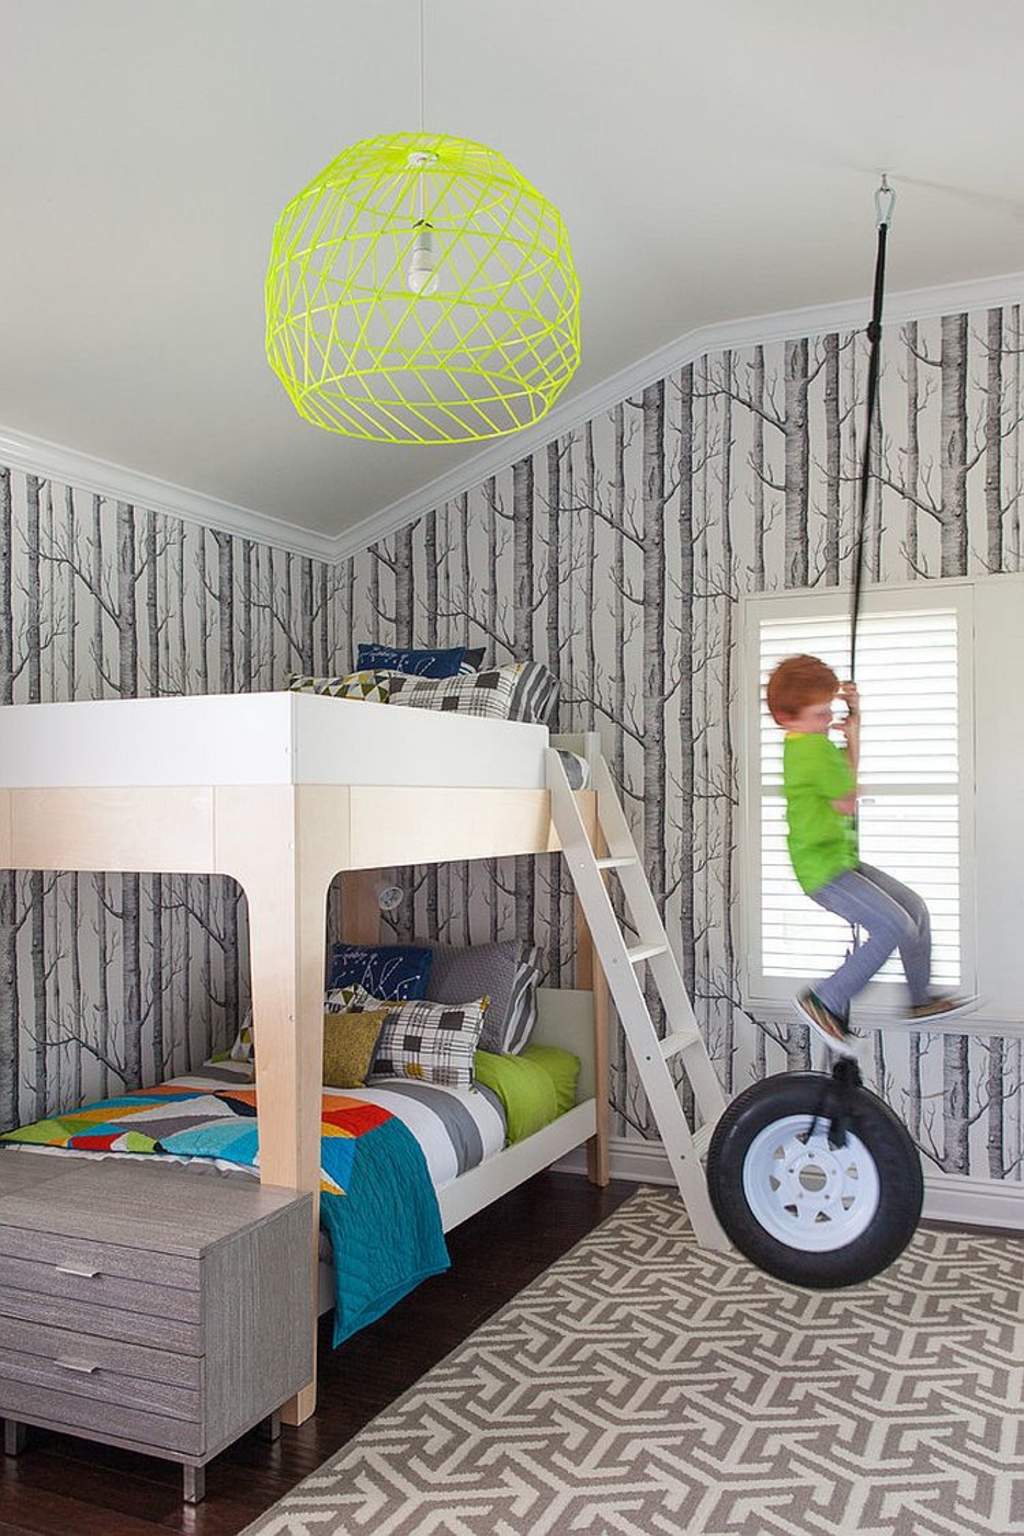 Woods Wallpaper And Rug Bring Gray Into This Bedroom - Cool Wallpaper For Boys Room , HD Wallpaper & Backgrounds